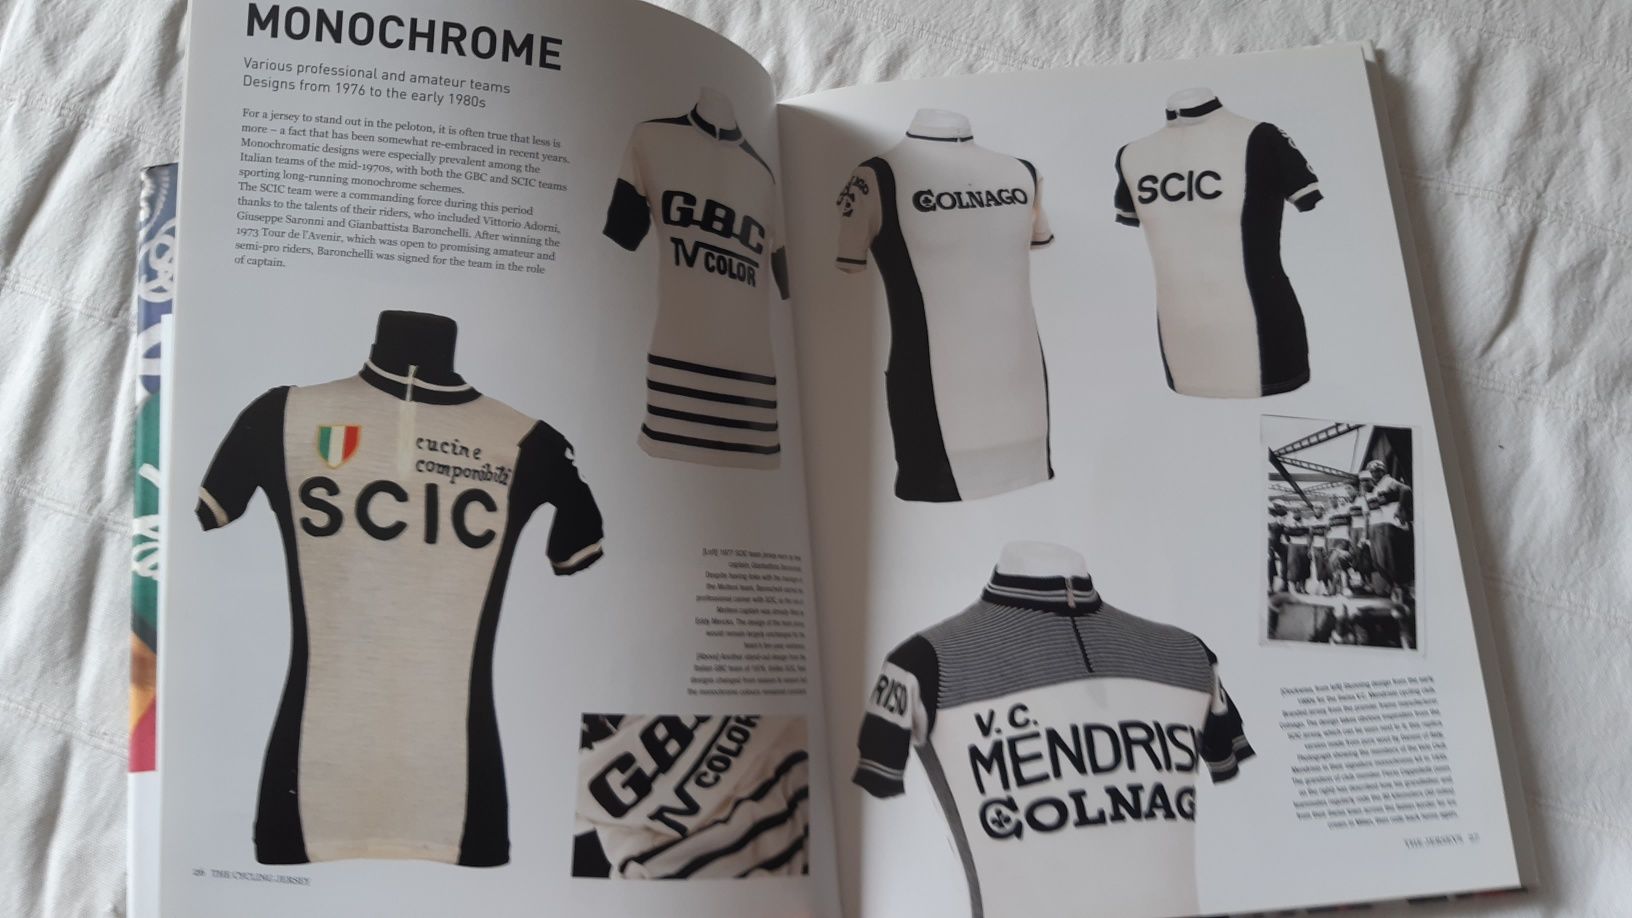 The Cycling Jersey